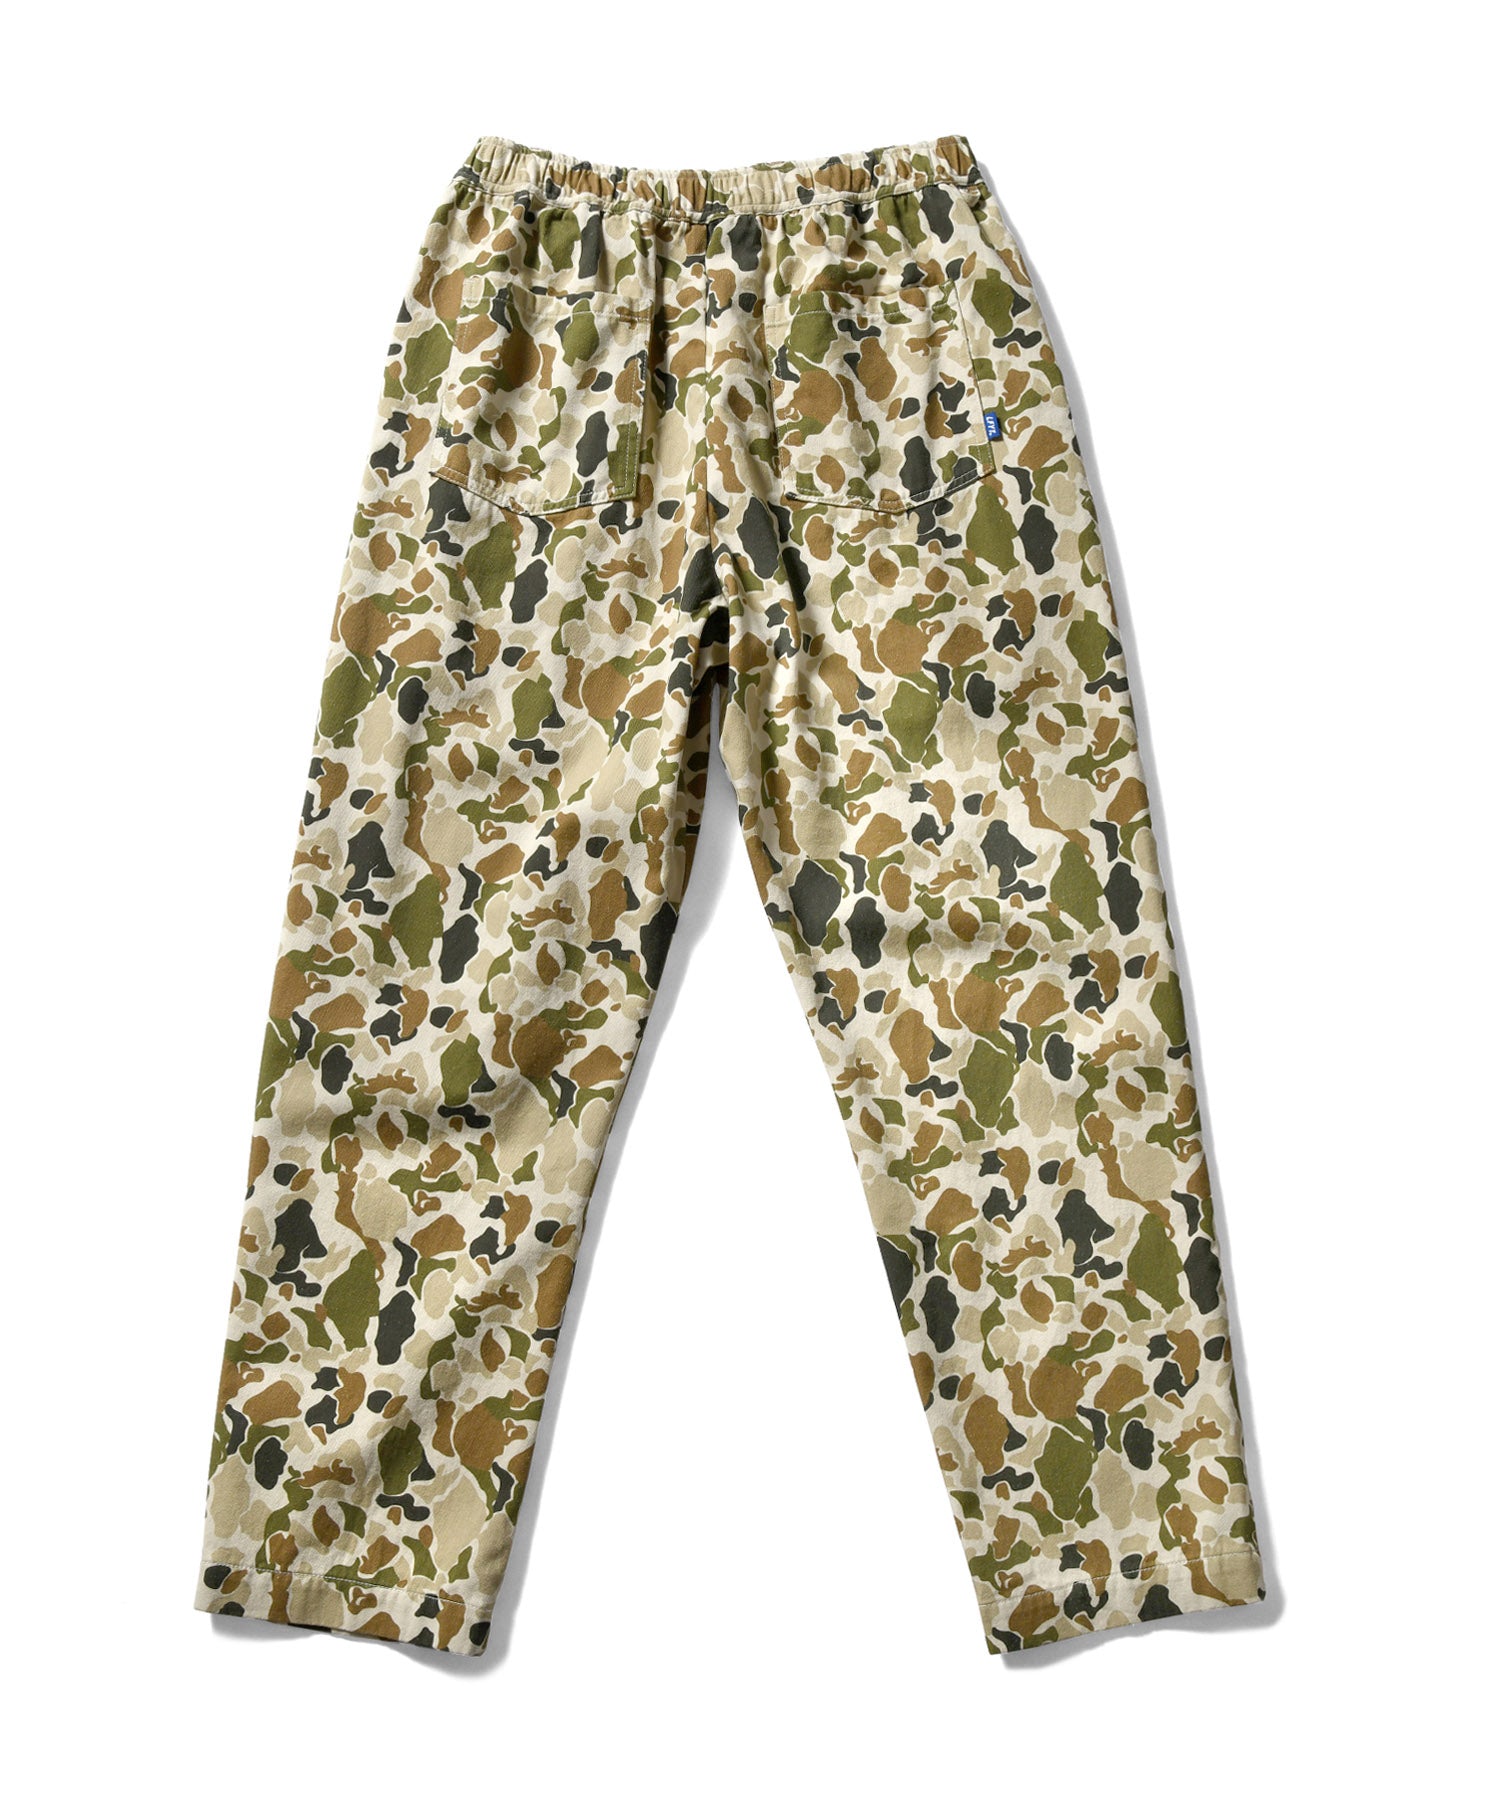 RELAXED FIT CHEF PANTS LA221201 HUNTER CAMOUFLAGE